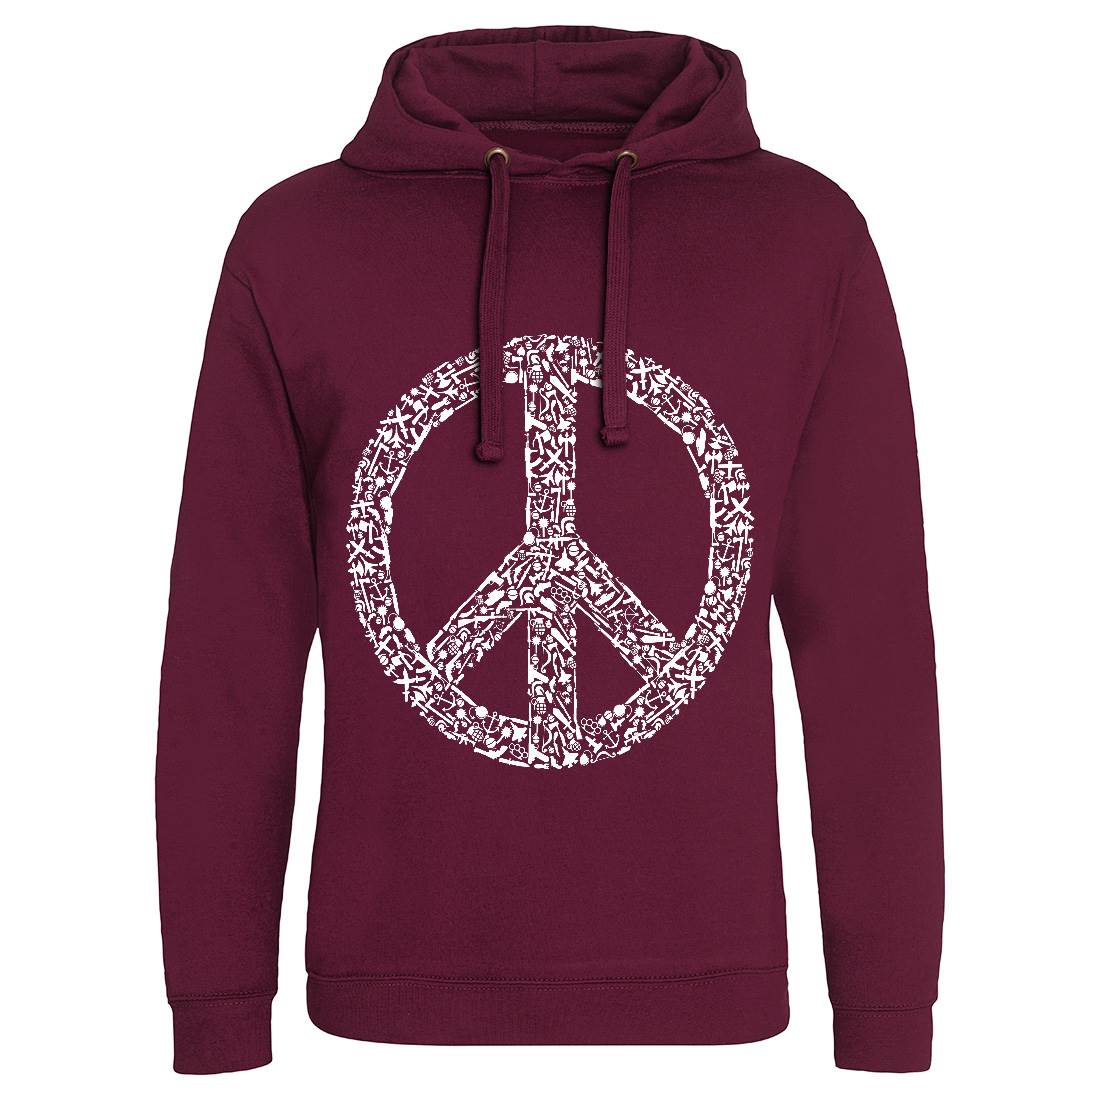 War Mens Hoodie Without Pocket Peace B093